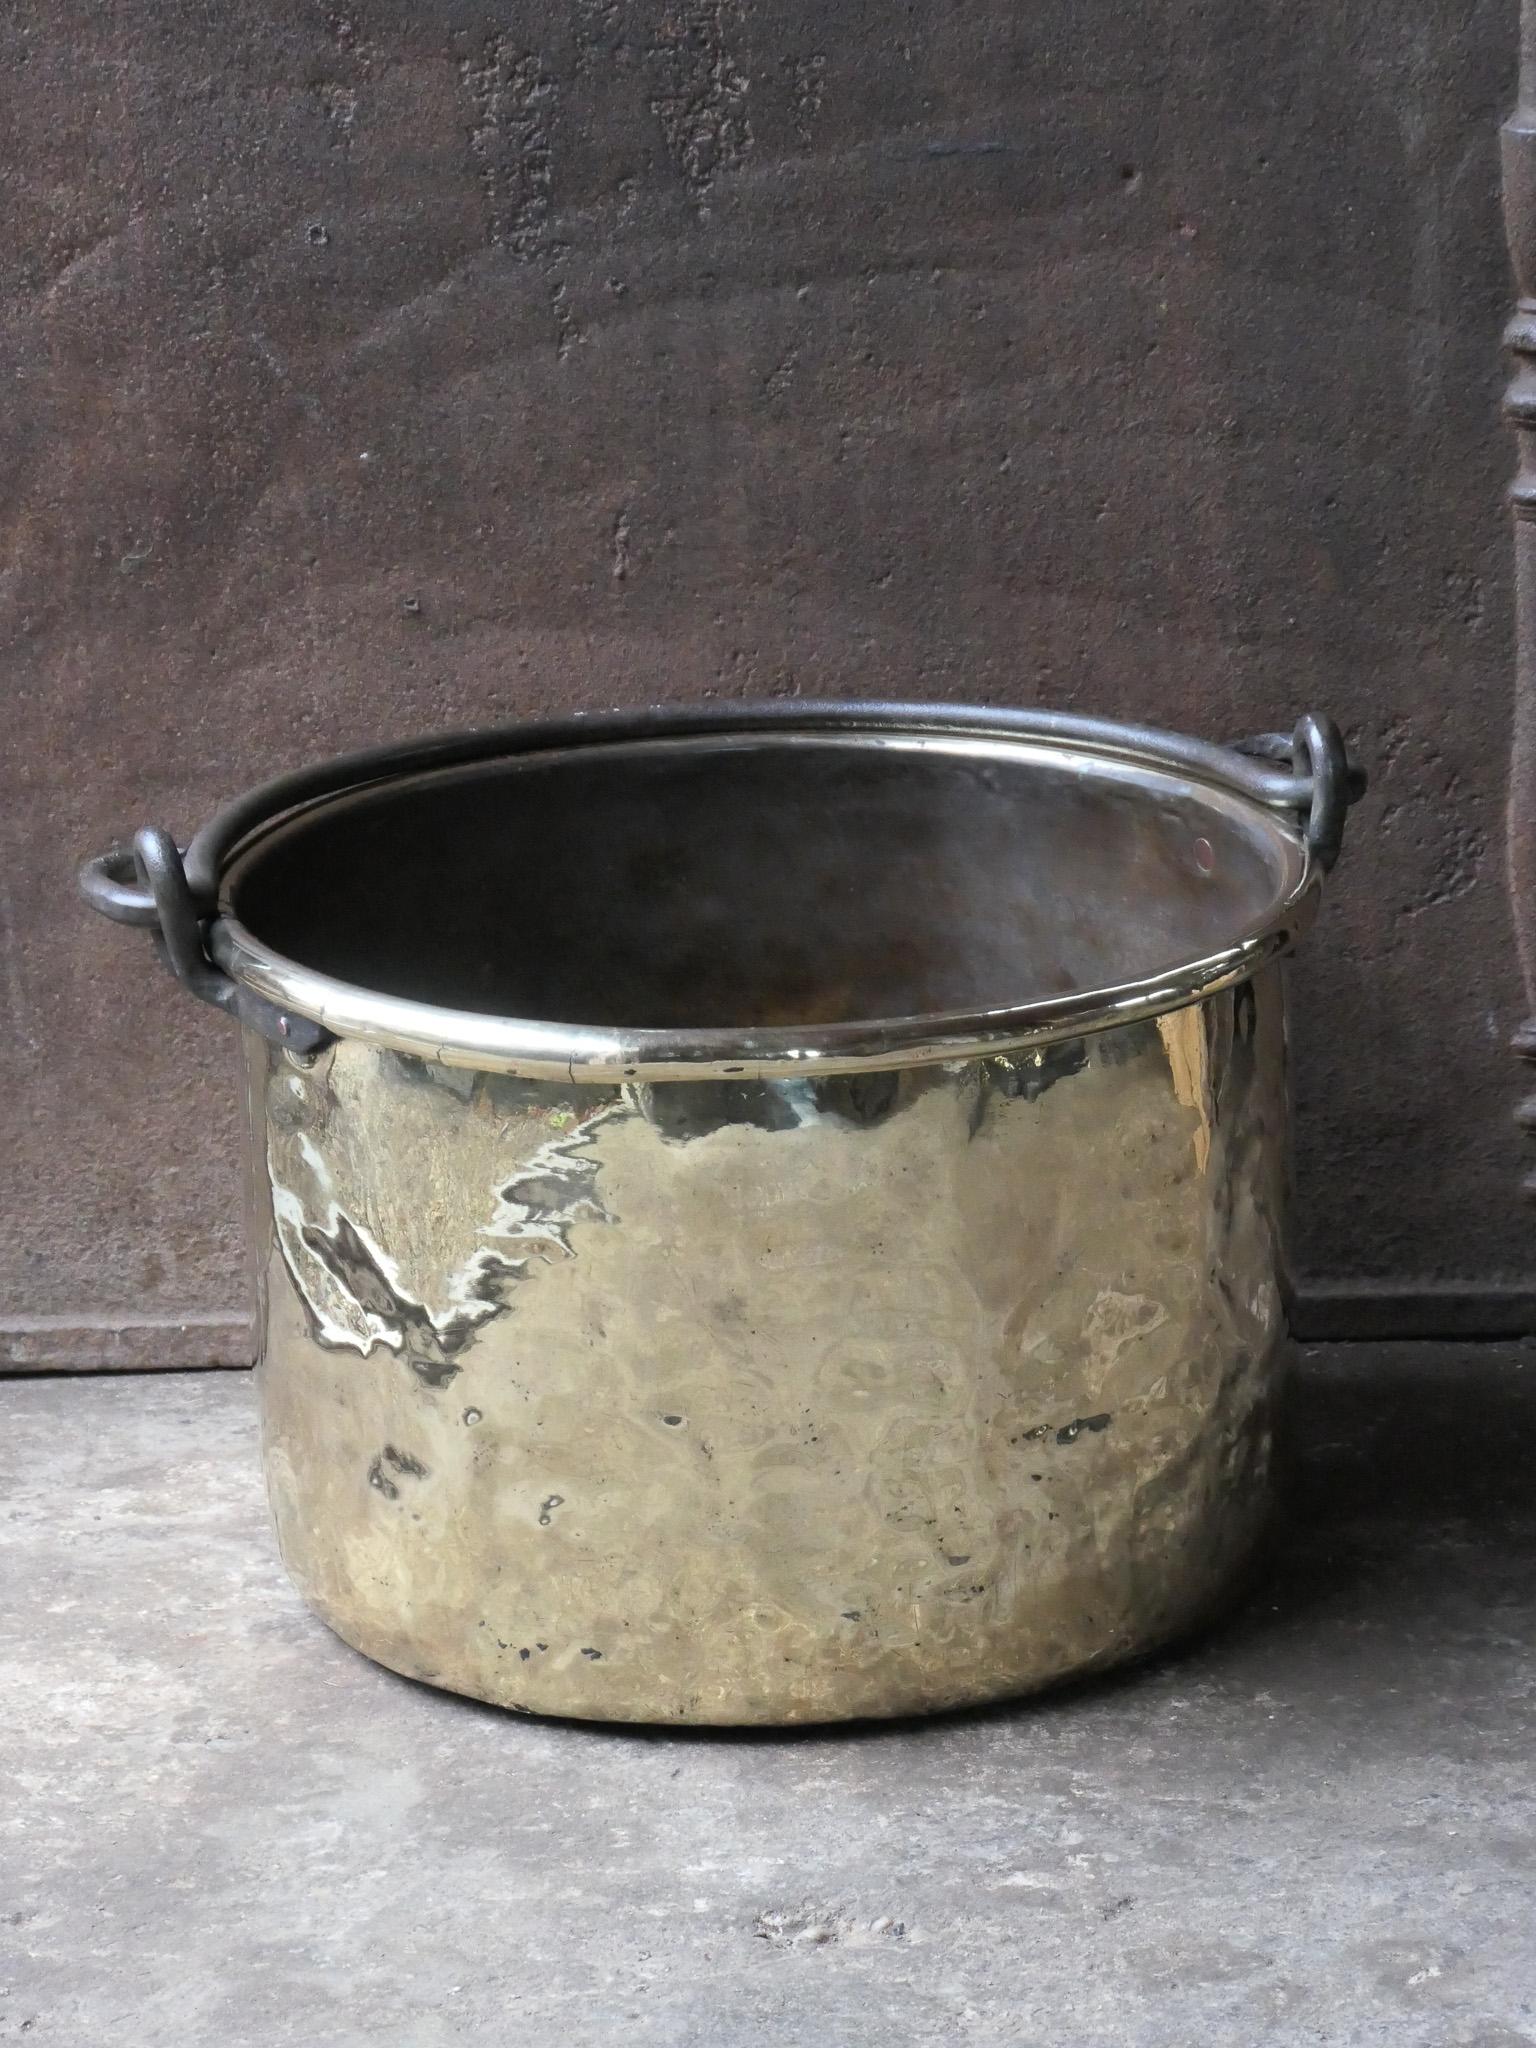 18th century Dutch log basket. The firewood basket is made of polished brass and has a wrought iron handle. Also called 'aker'. Used to draw water from the well and cook over an open fire.

The log holder is in a good condition and is fully